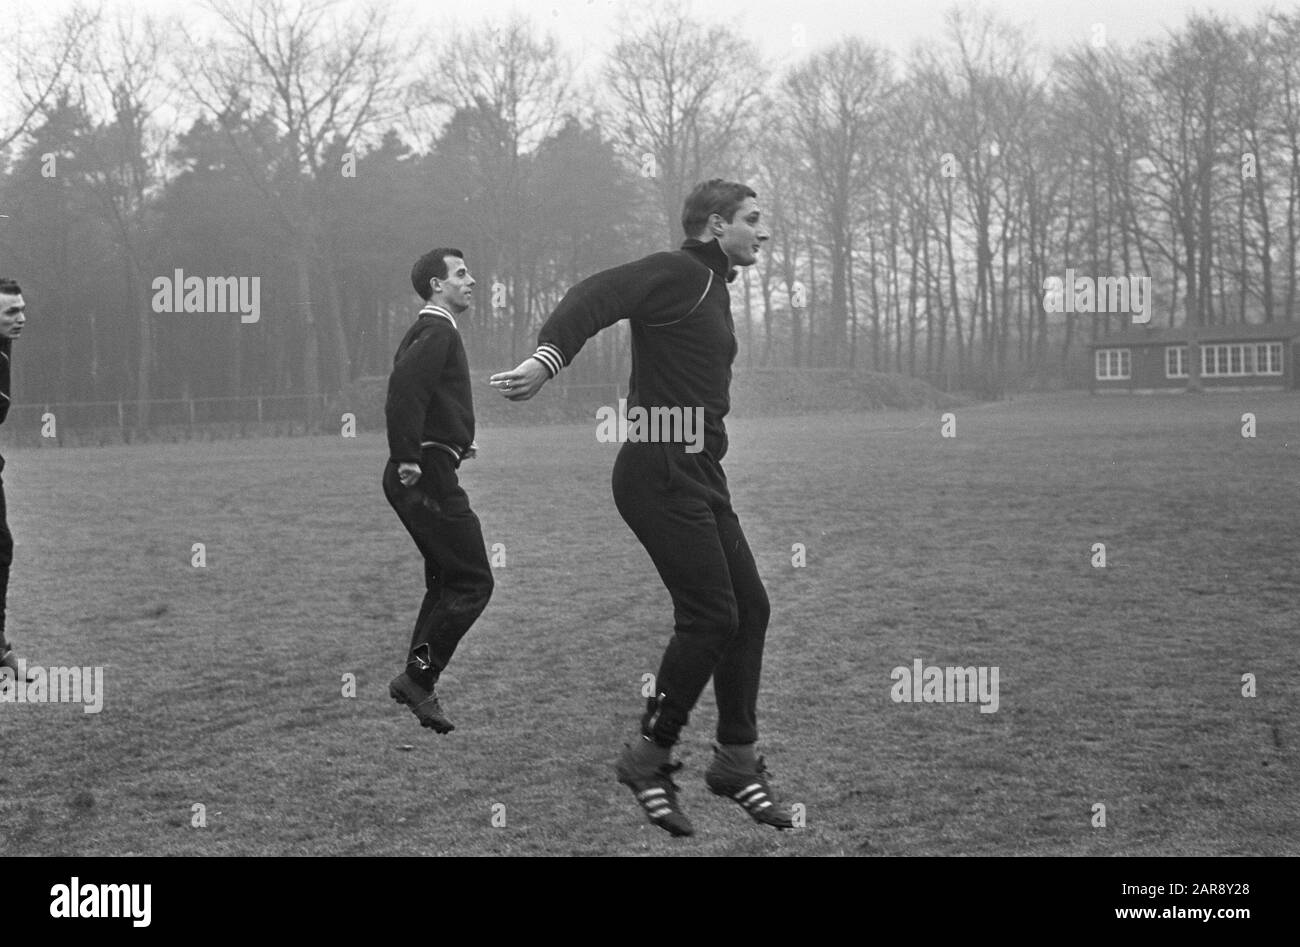 Training Dutch team at Zeist, players during training. Left Coen Moulijn, right? Date: November 26, 1964 Location: Zeist Keywords: sport, training, football Personname: Moulijn, Coen Stock Photo